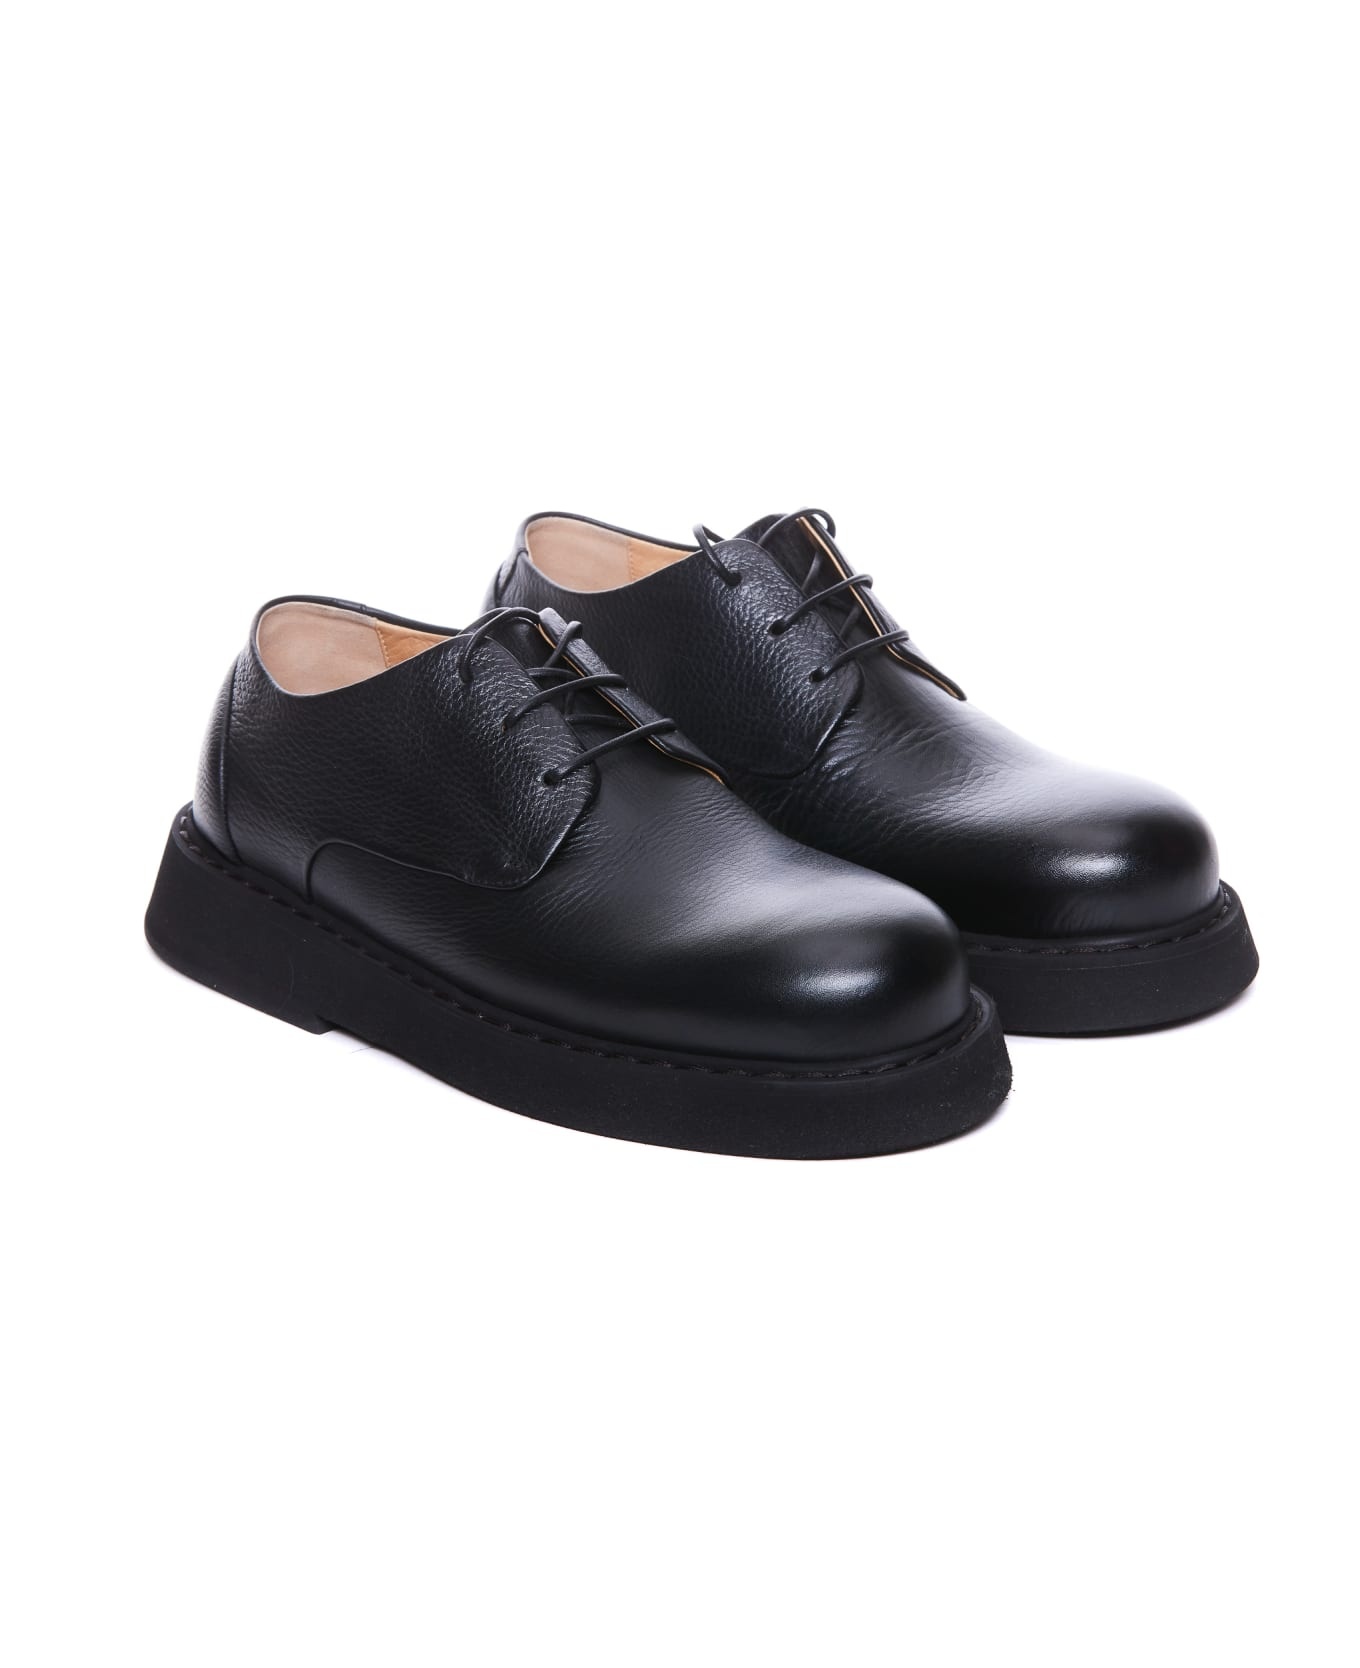 Spalla Derby Laced Up Shoes - 4